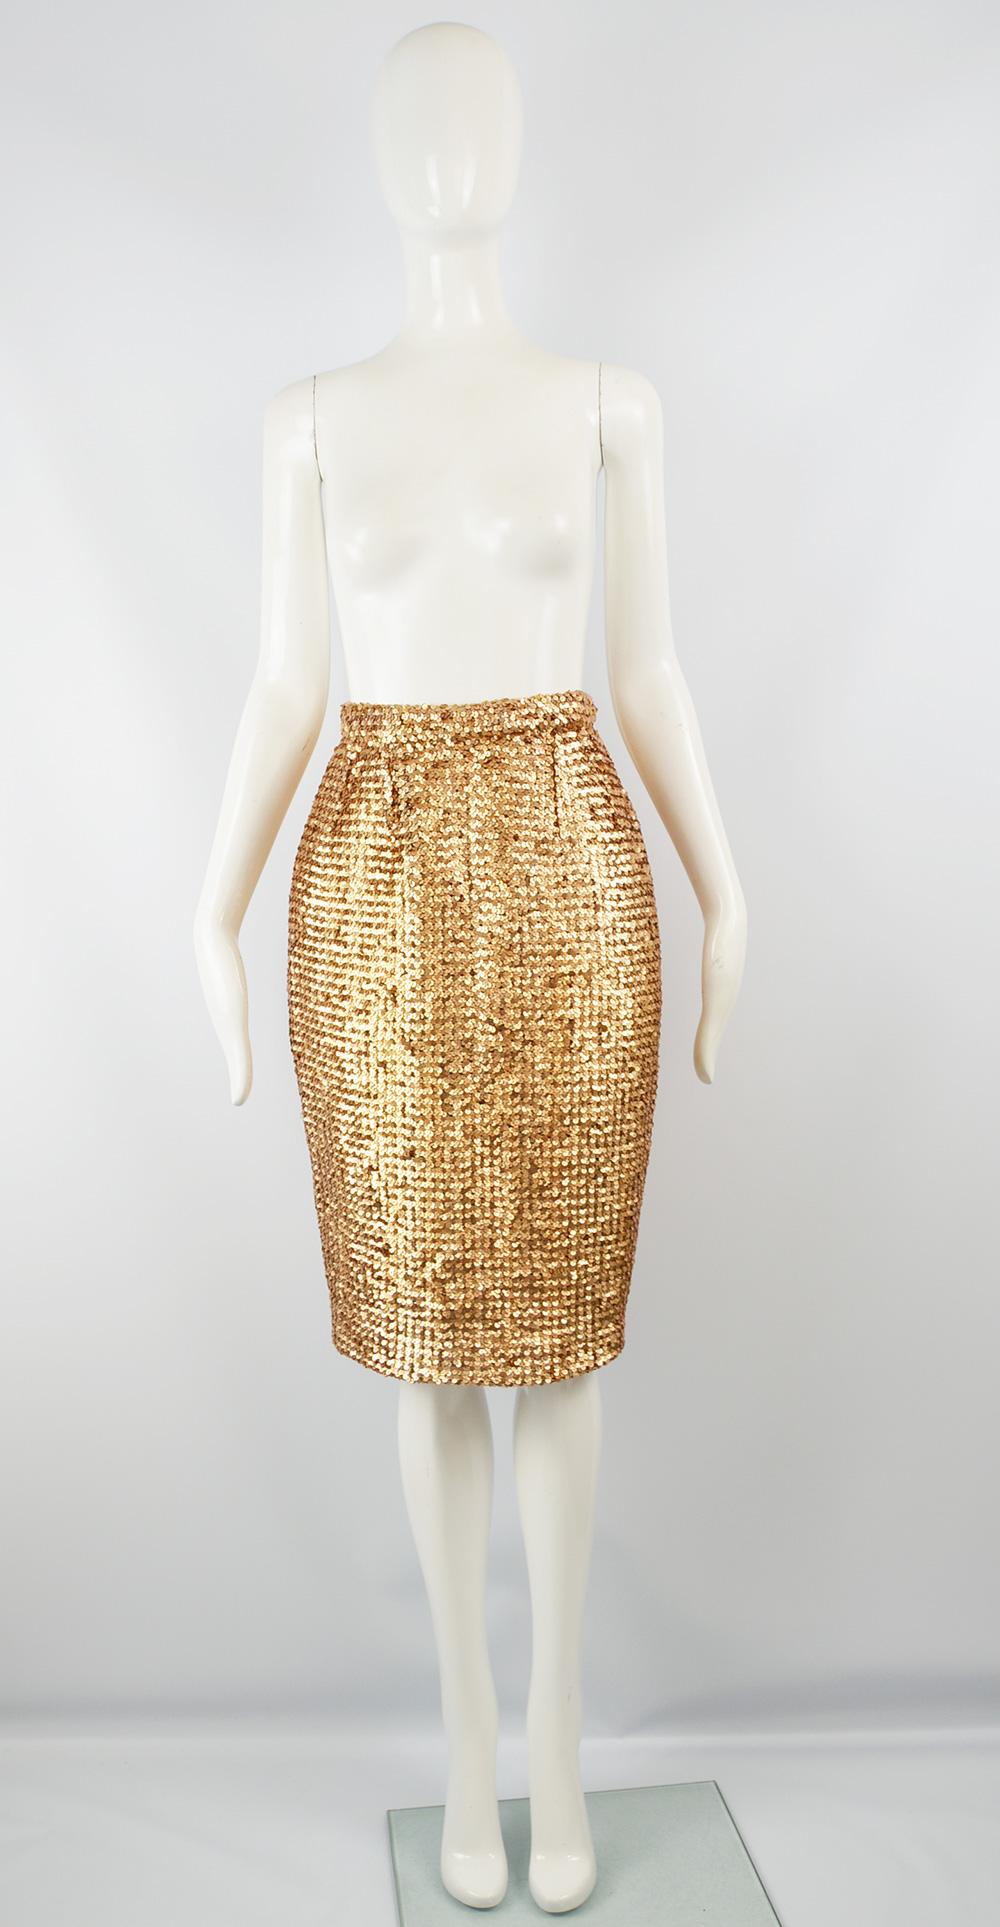 An incredibly chic vintage women's pencil skirt from c.the late 80s by luxury French fashion designer, Guy Laroche. In a knit fabric completely covered in rose gold / bronze sequins and silver lurex thread throughout for a truly glamorous look. 